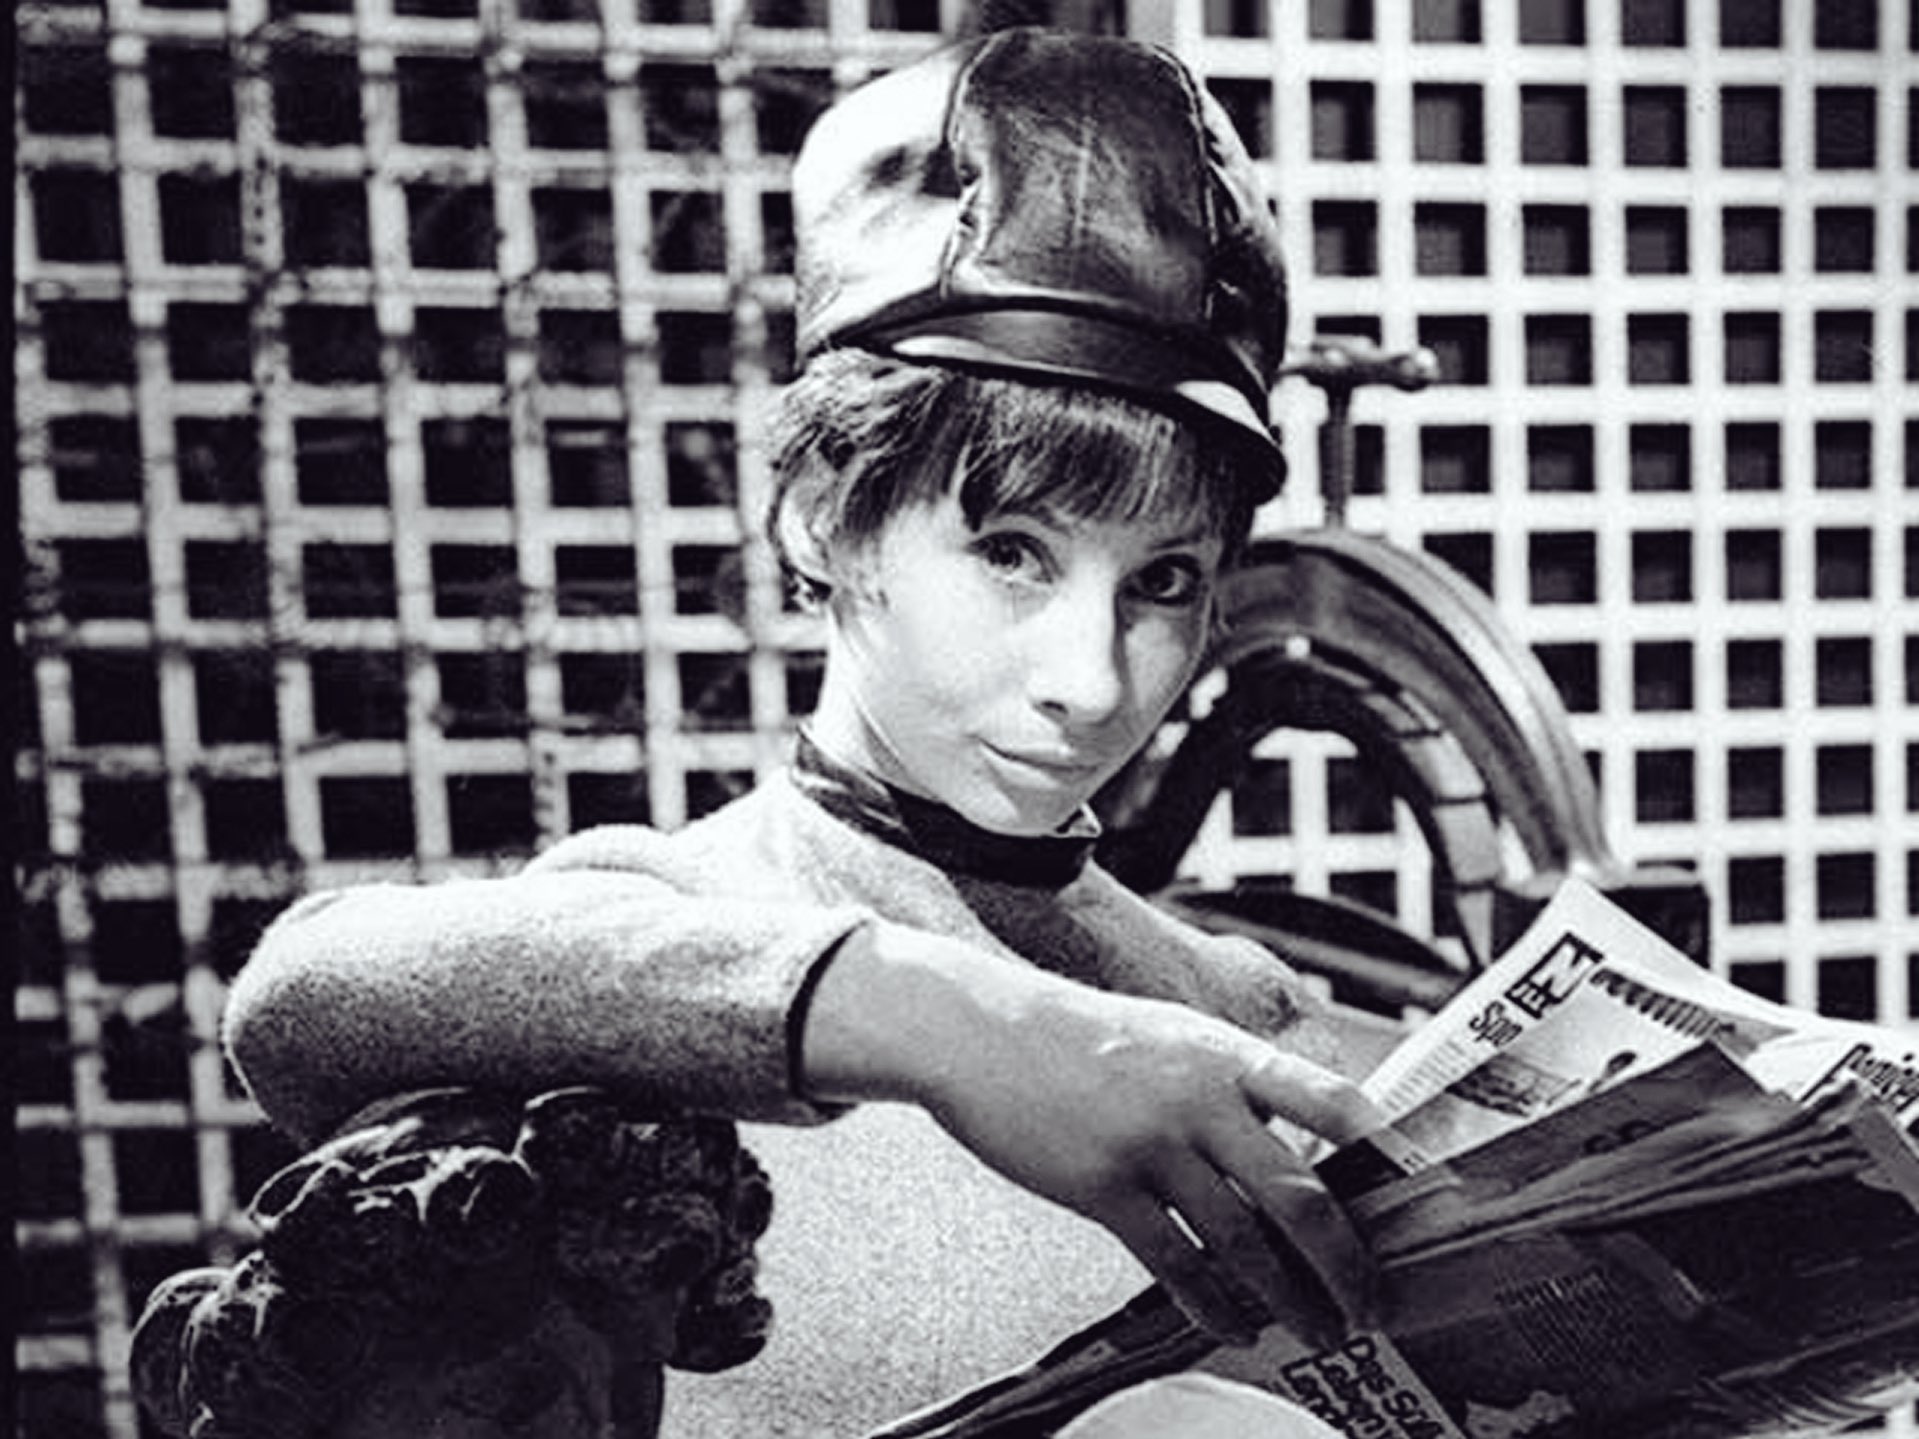 Happy birthday to the original Time Lady, Carole Ann Ford! Thank you for being the first     